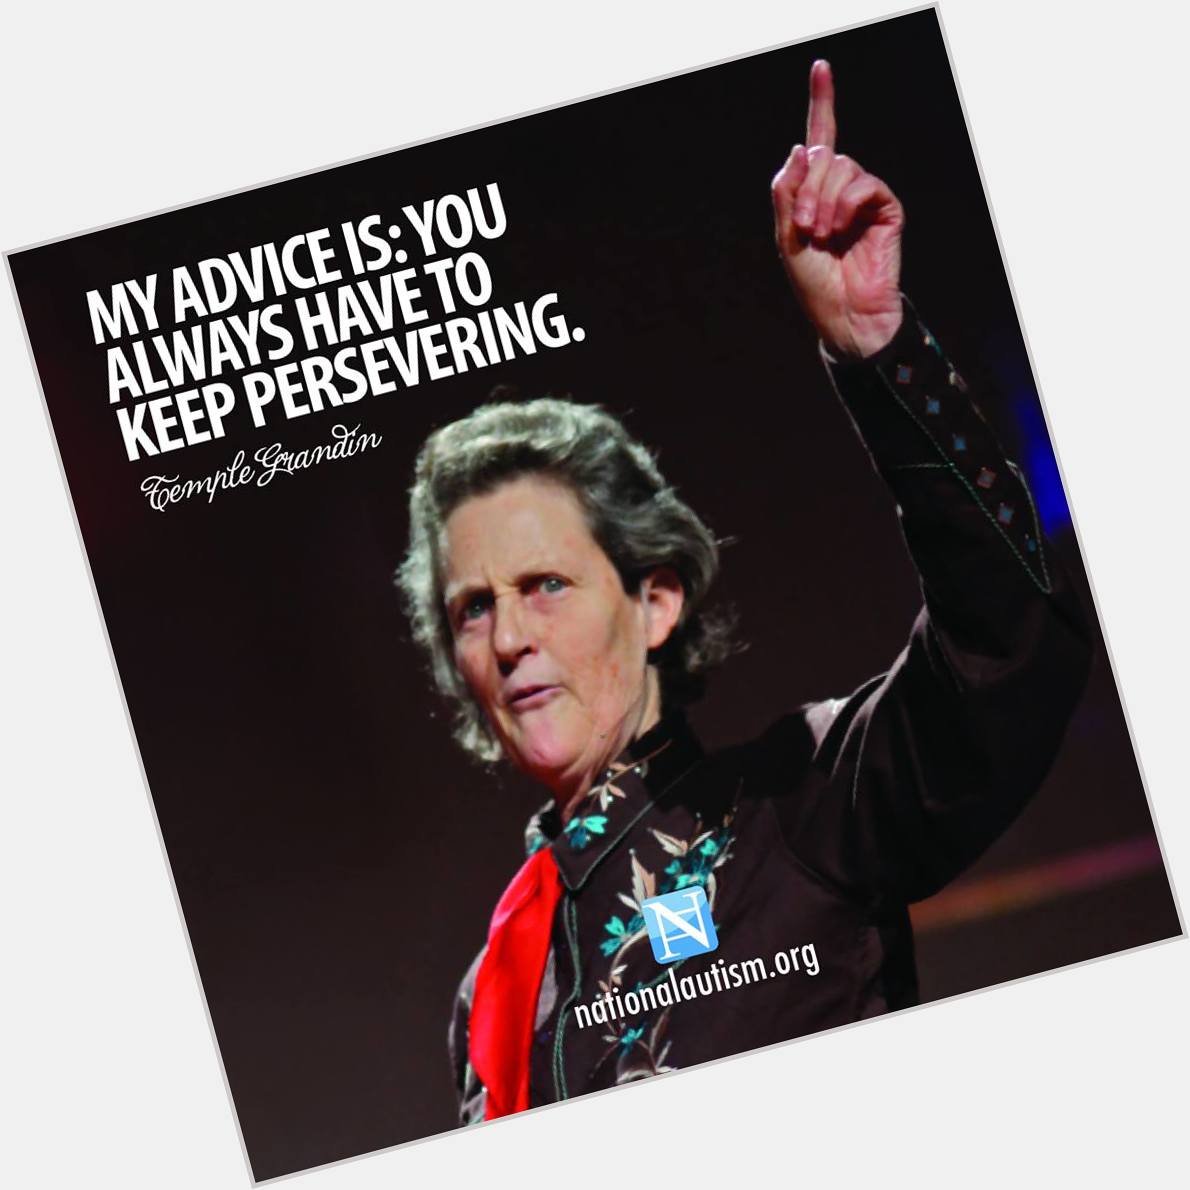 HAPPY BIRTHDAY! Join us in wishing Temple Grandin a very Happy Birthday today! 